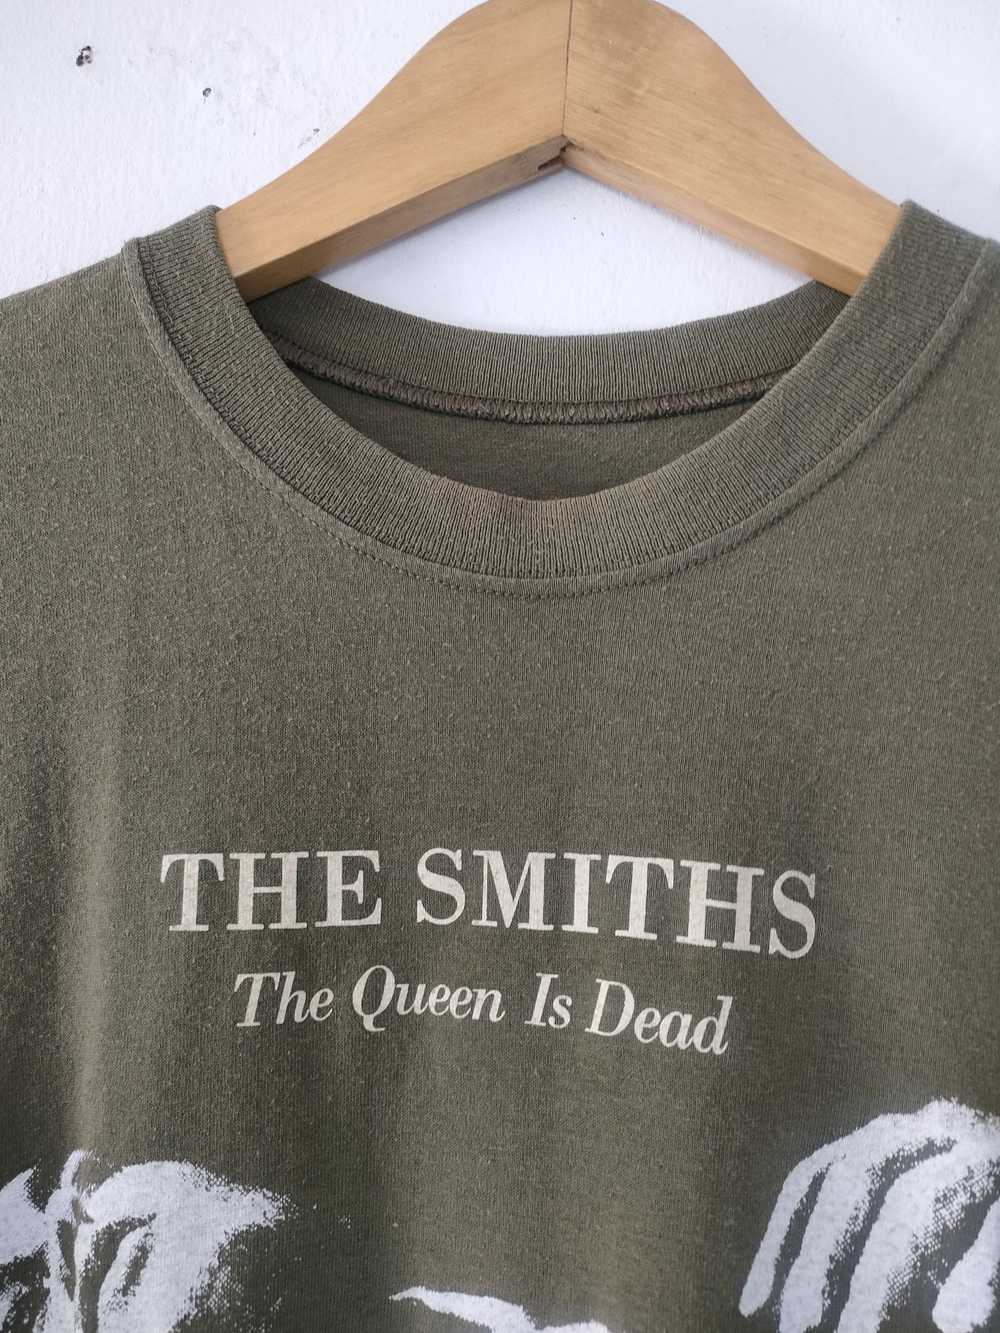 Band Tees × Morrissey × The Smiths THE SMITHS 'TH… - image 4